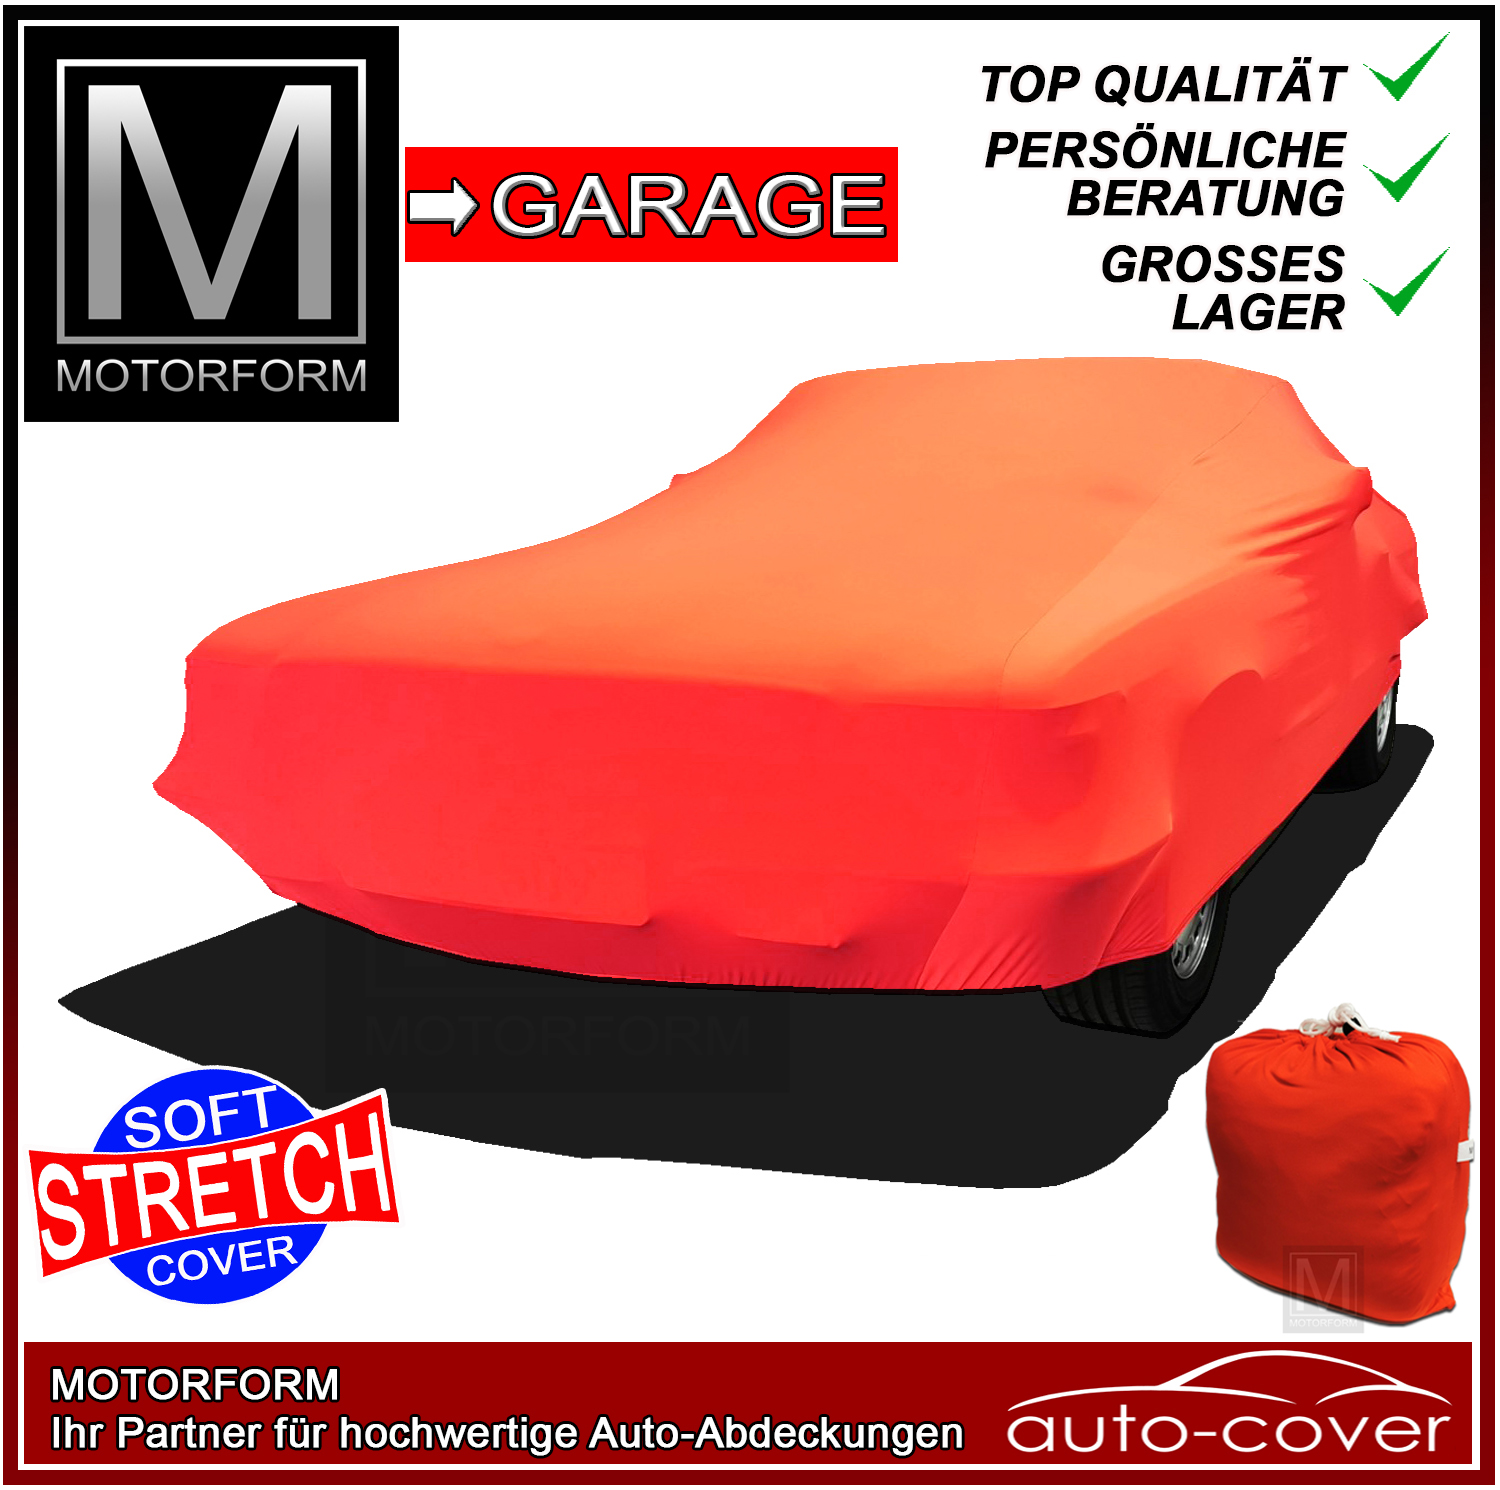 Super Stretchy Cover for Opel Vectra C (2002-08)